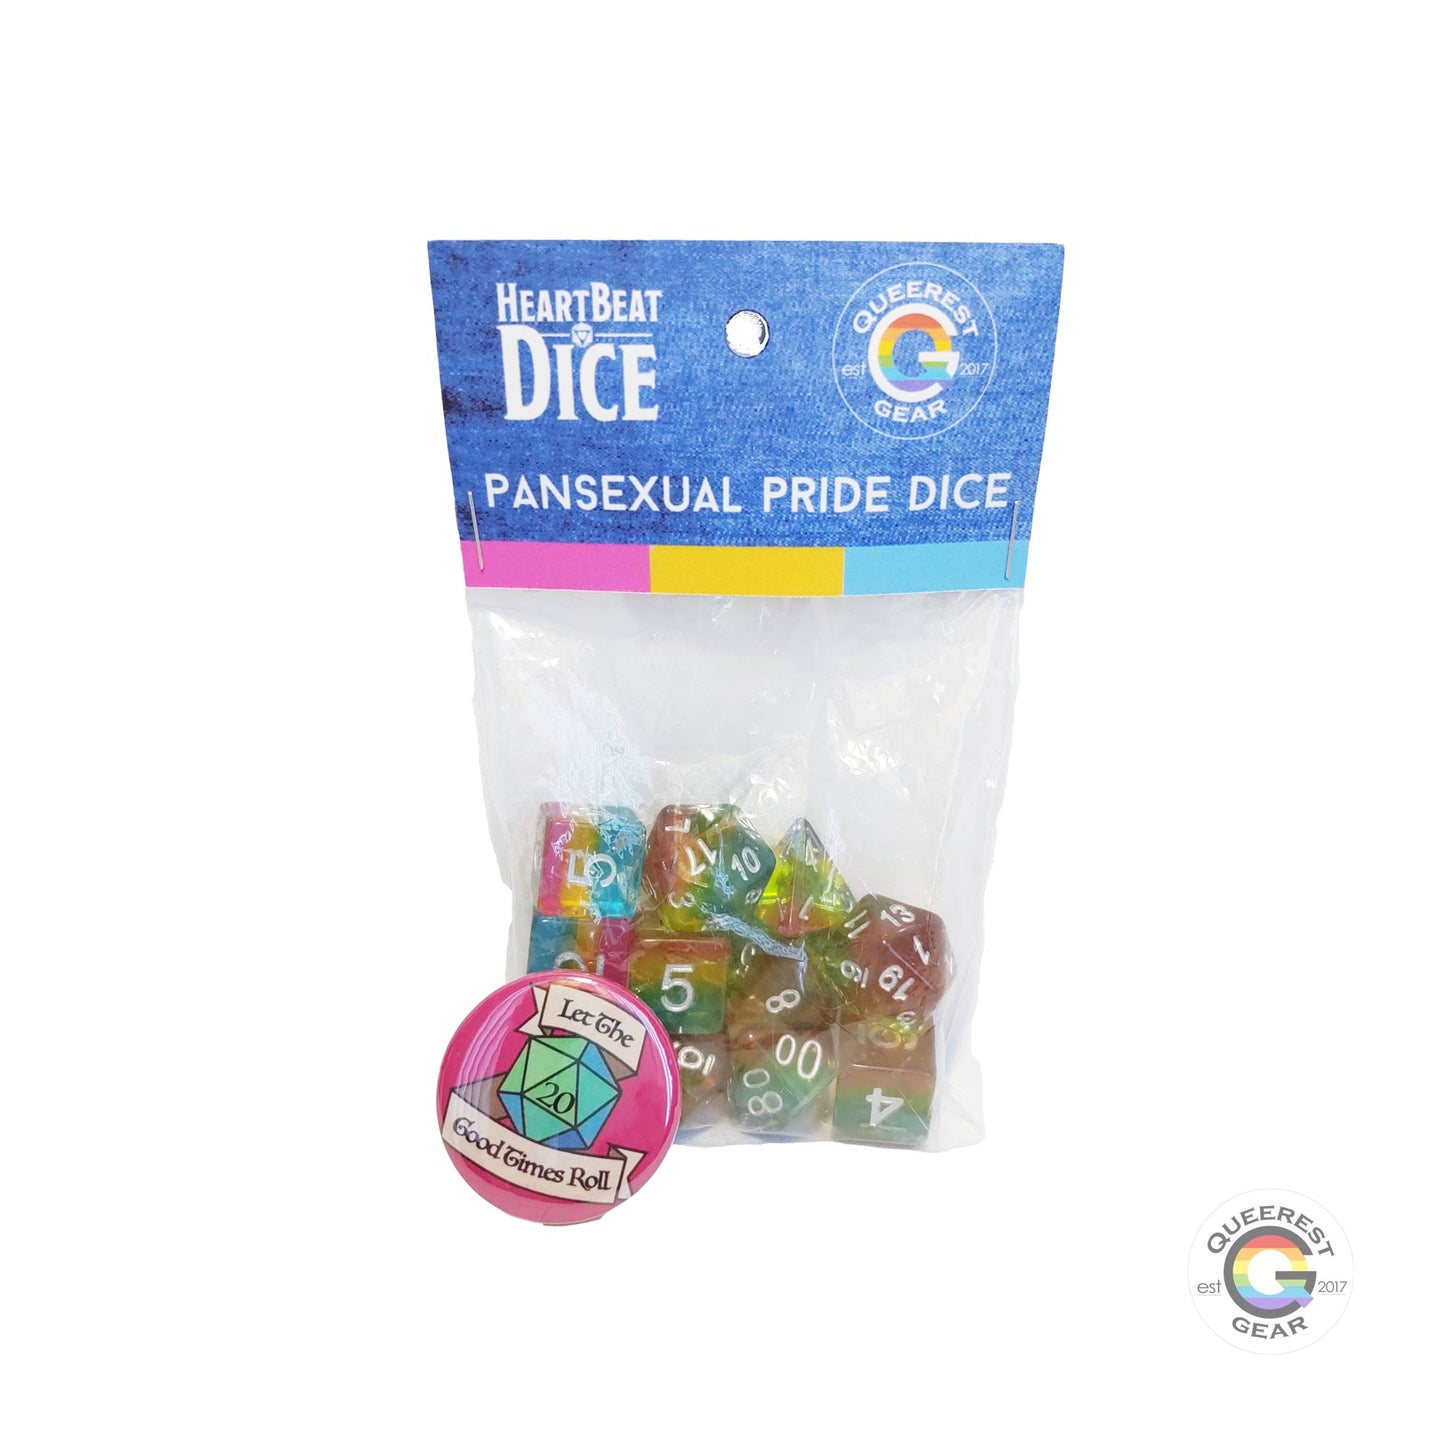 Pansexual pride dice in their packaging with a free “let the good times roll” button